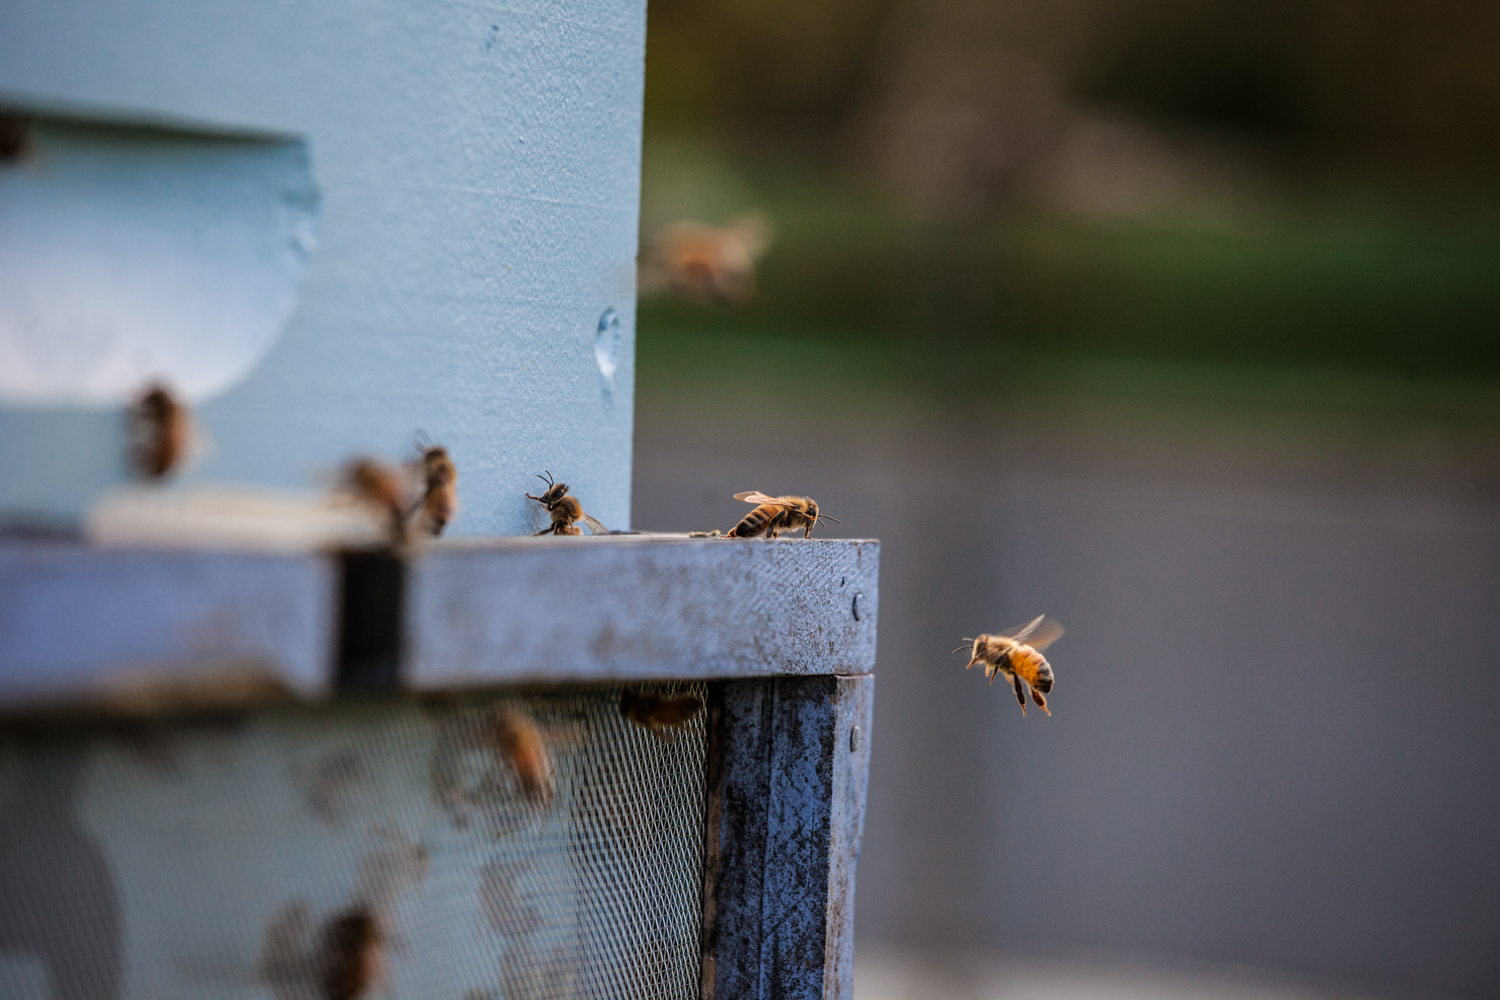 Introducing BuzzTech, the New Zealand company that is helping beekeepers go digital.